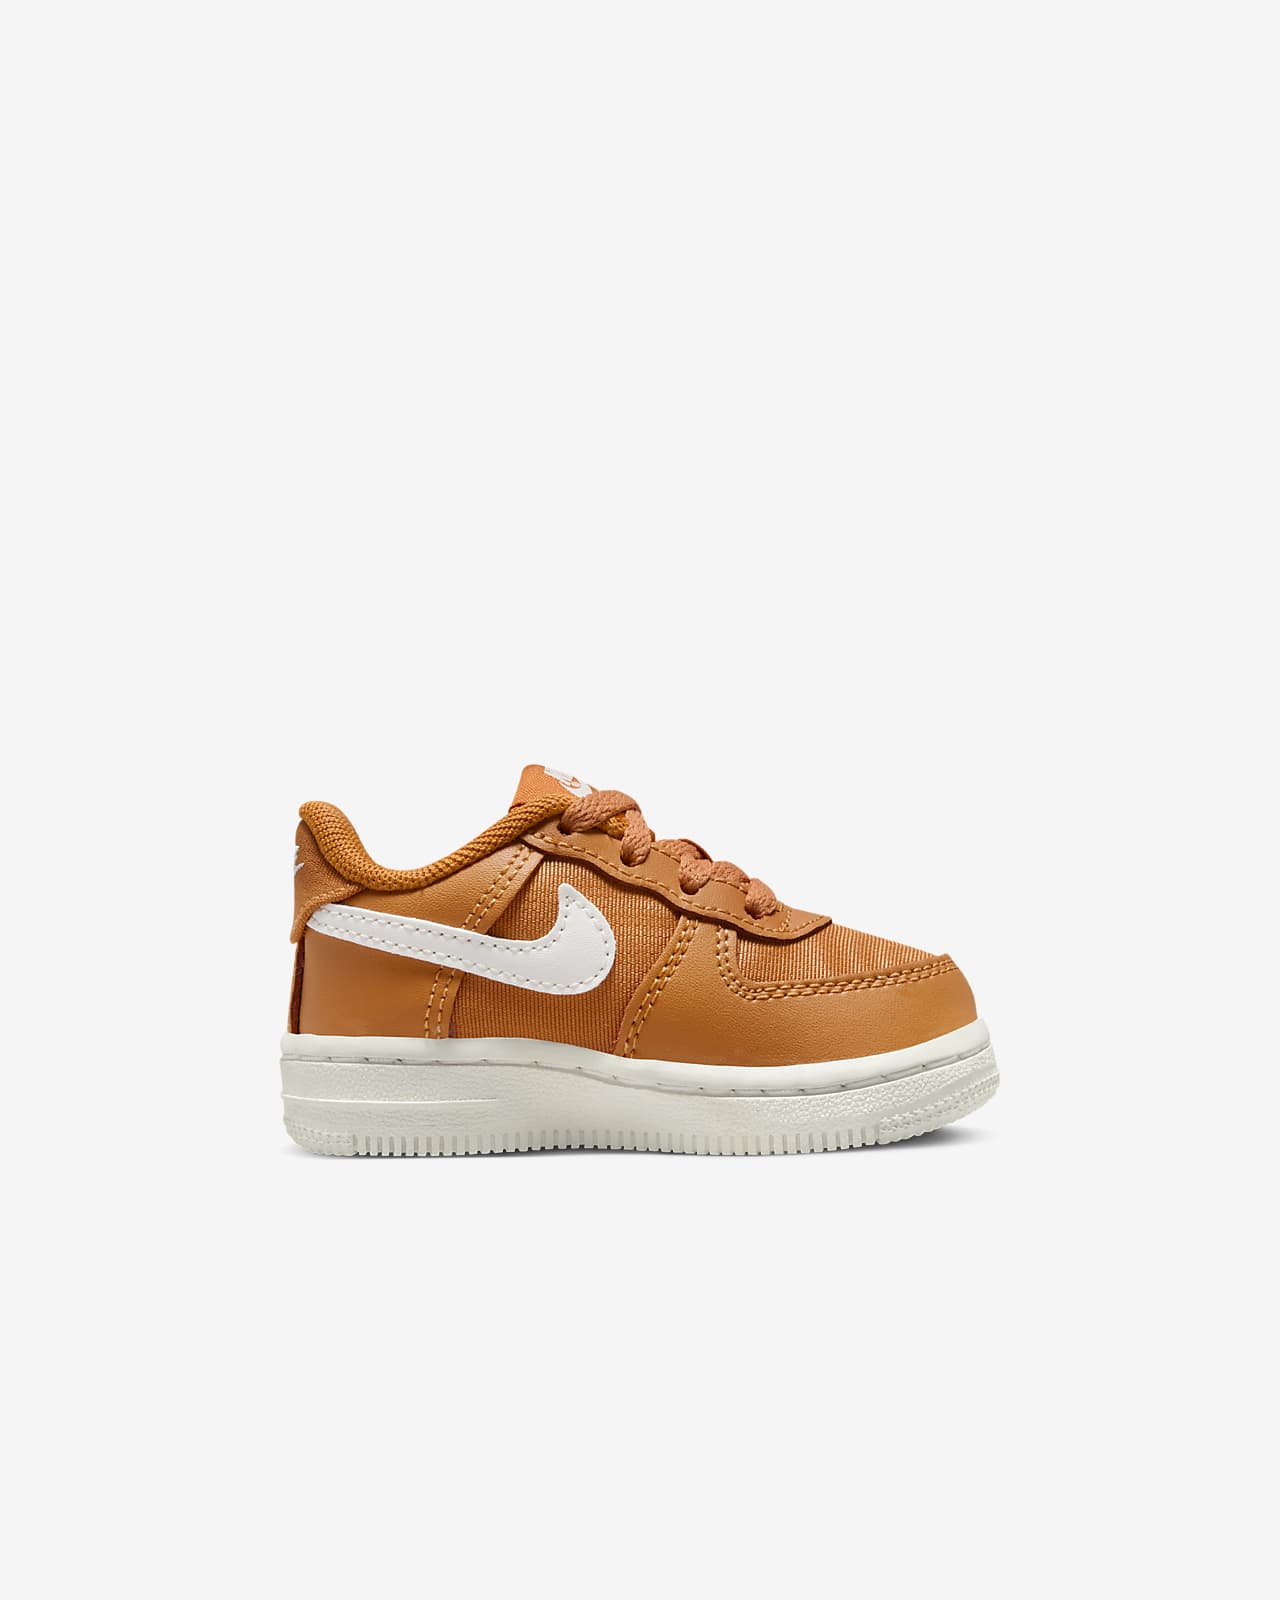 Shoes Nike Force 1 LV8 Baby/Toddler Shoe 